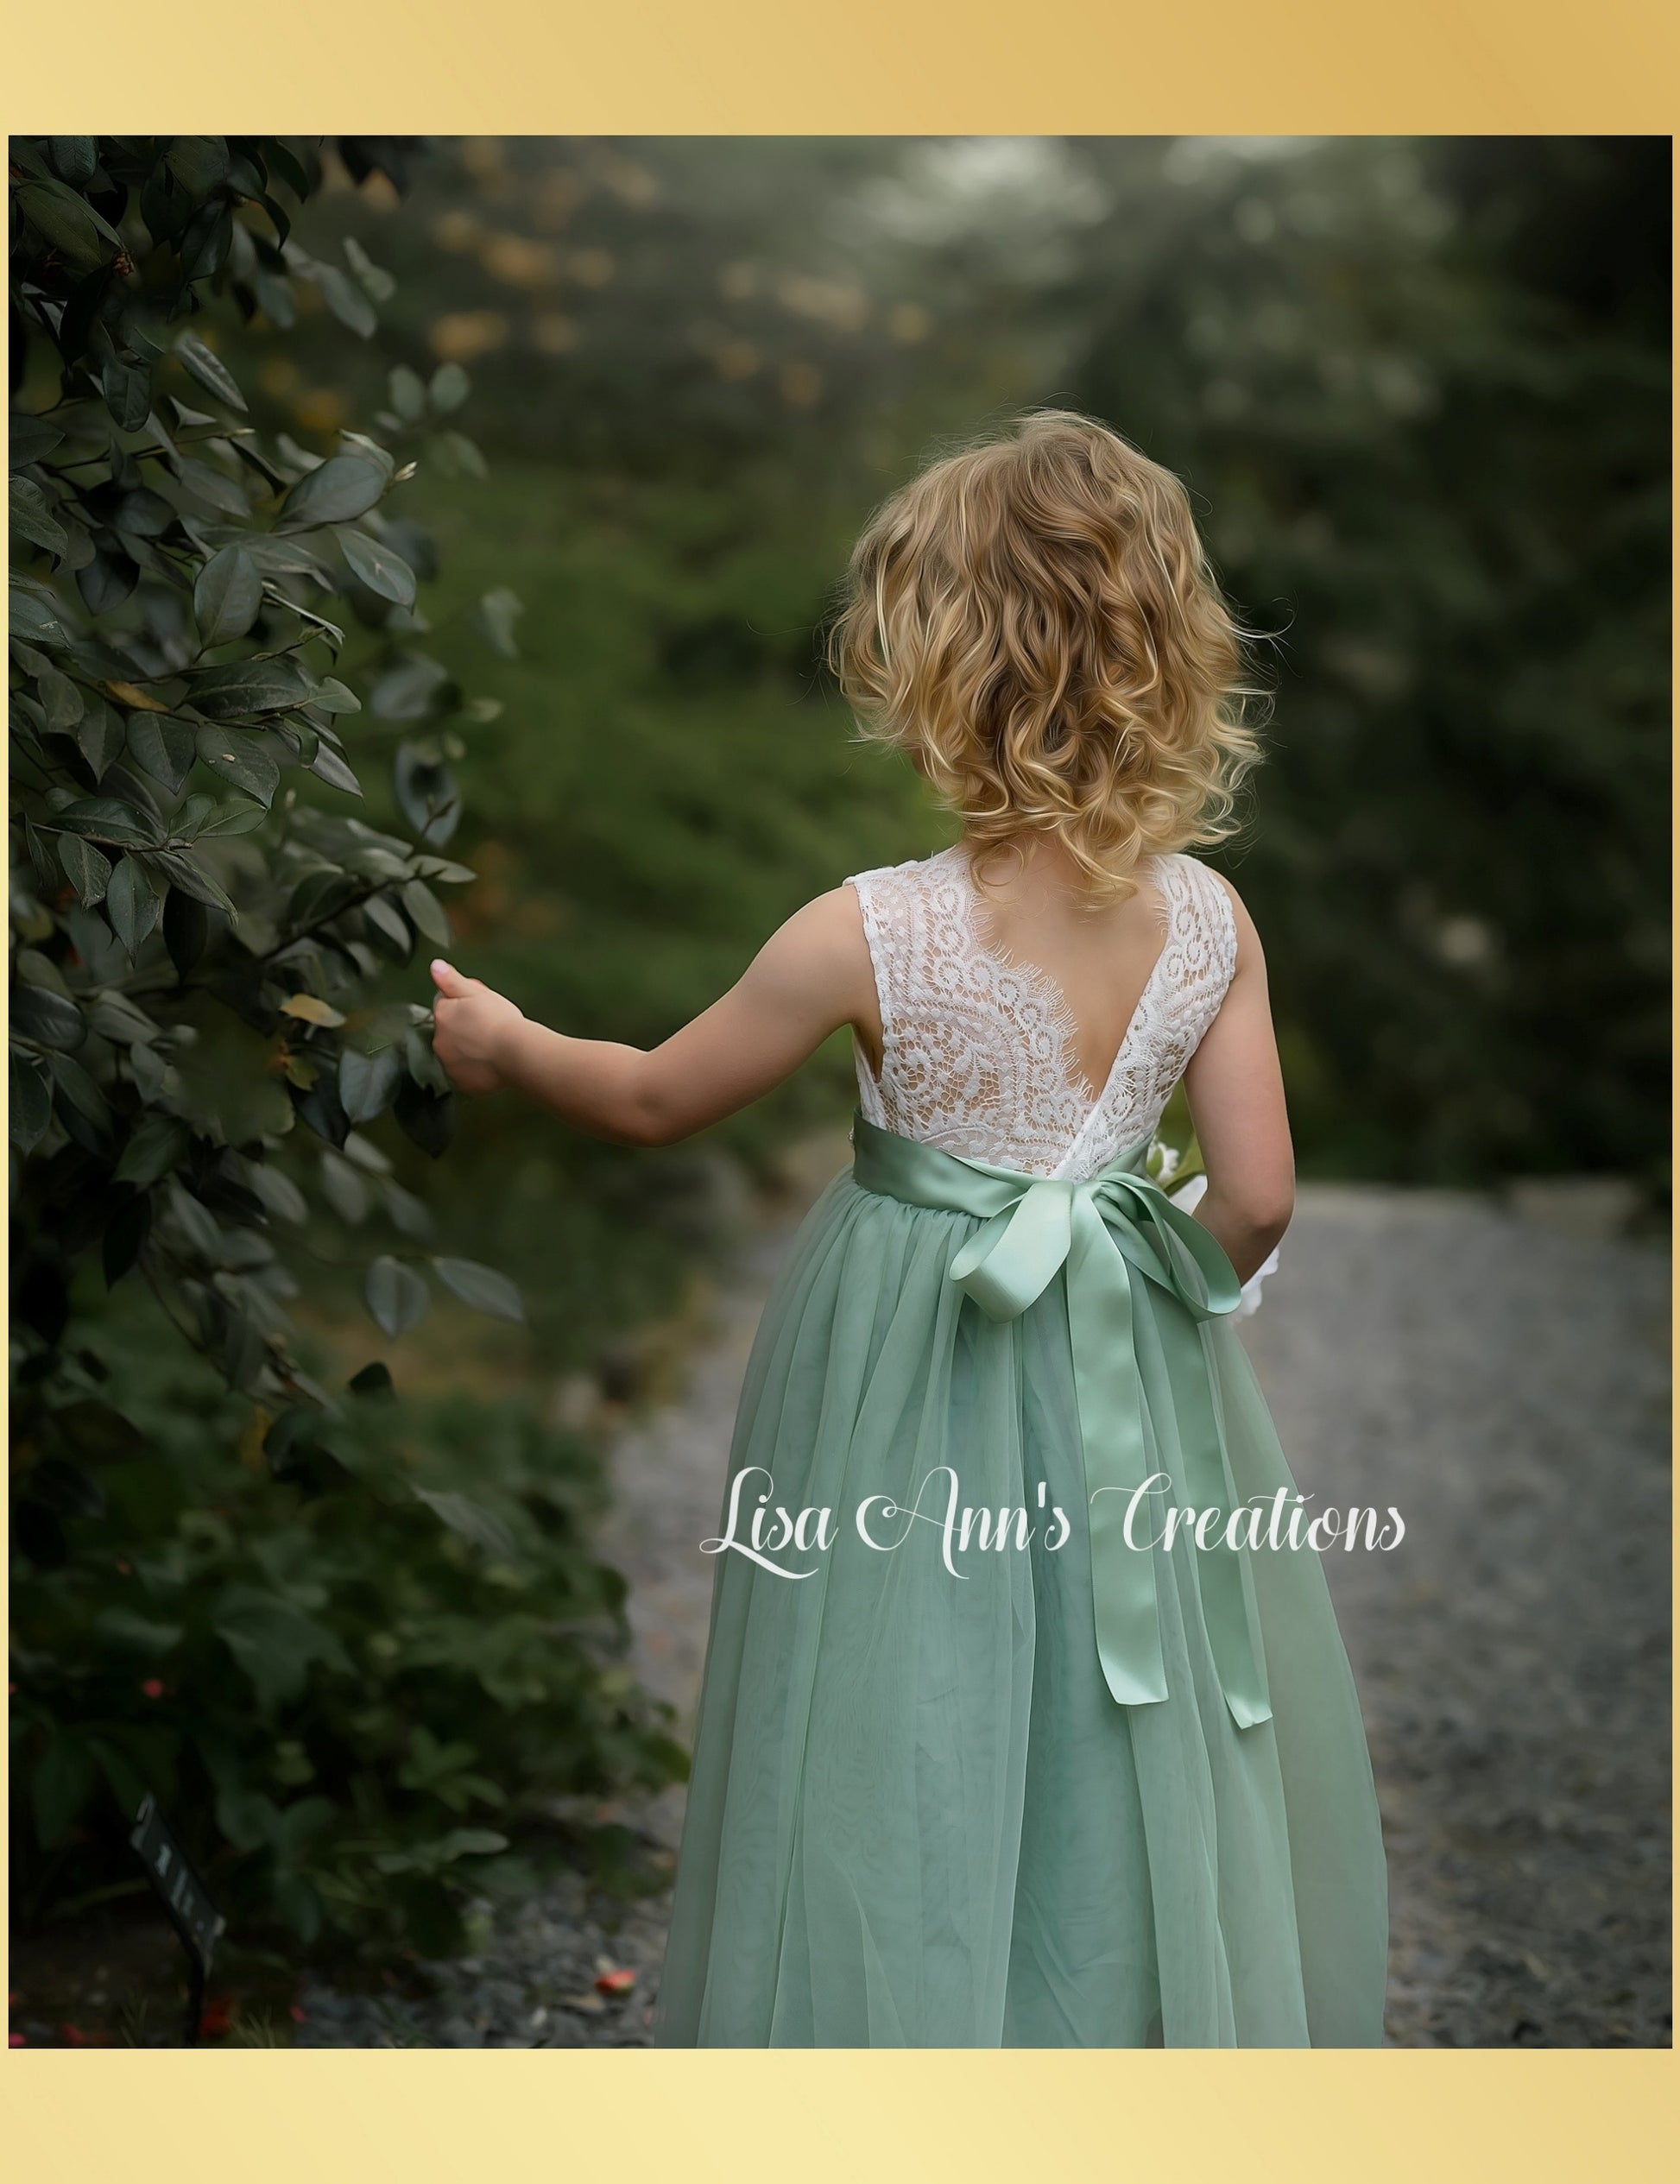 Tulle Flower girl dress in sage with white sleeveless lace